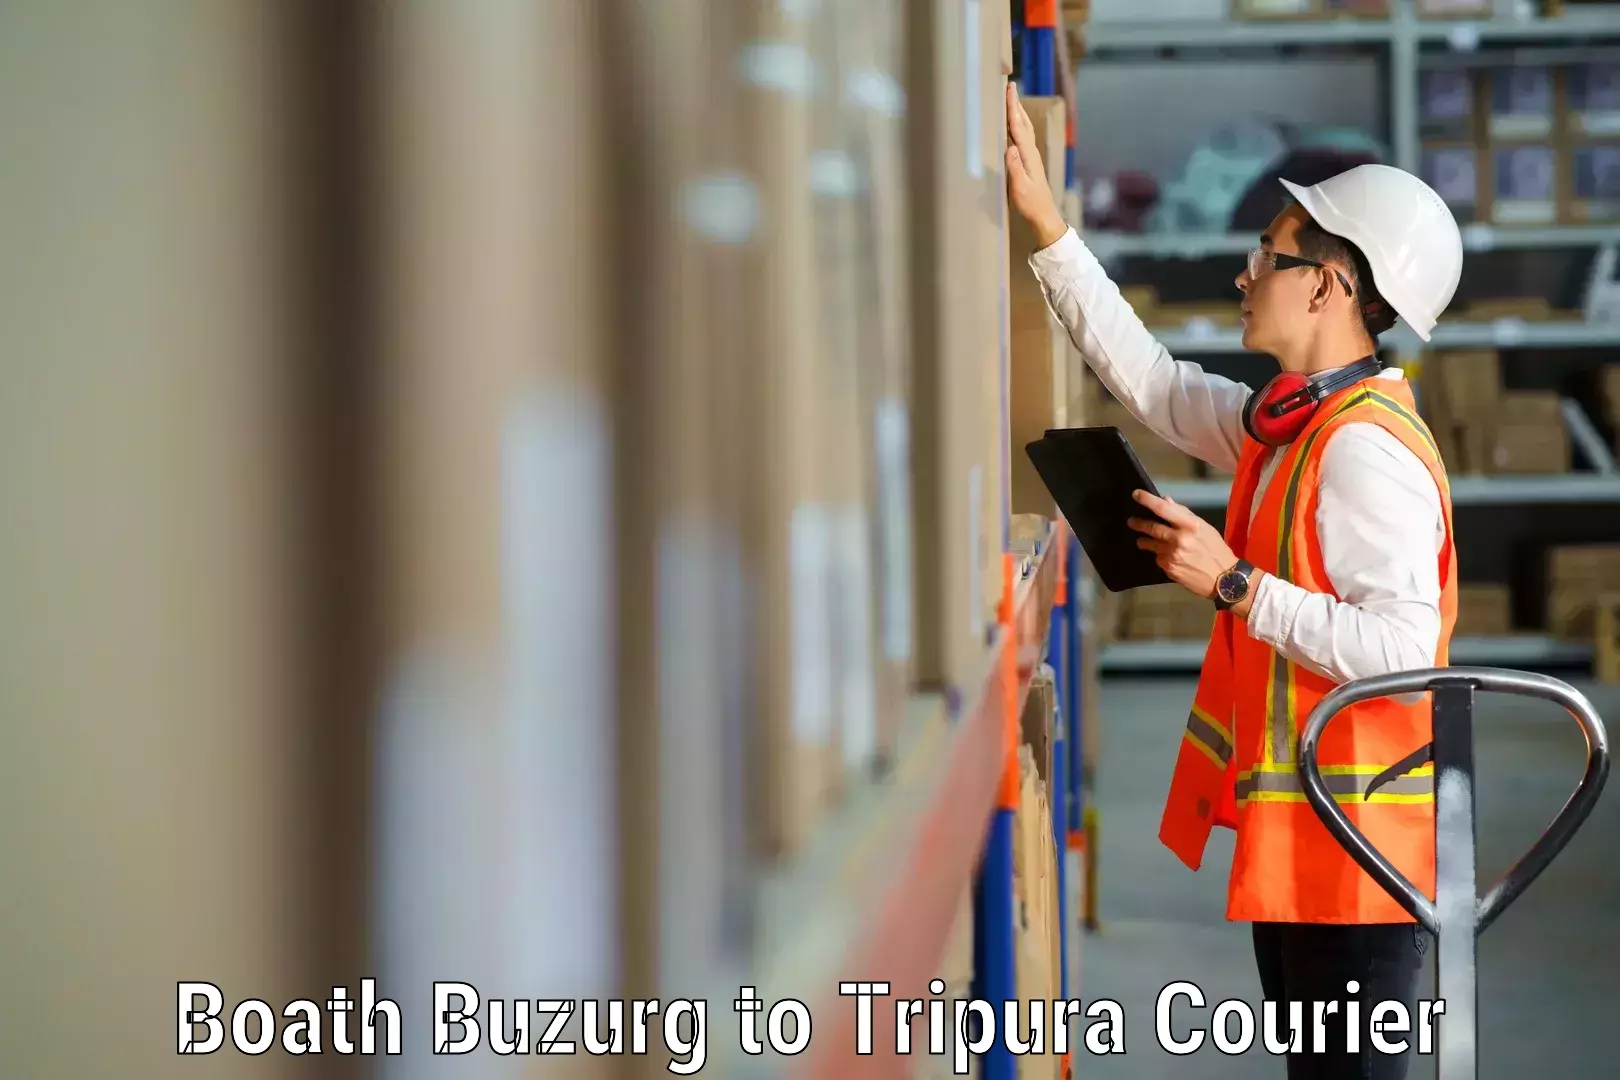 Cost-effective moving options Boath Buzurg to Tripura